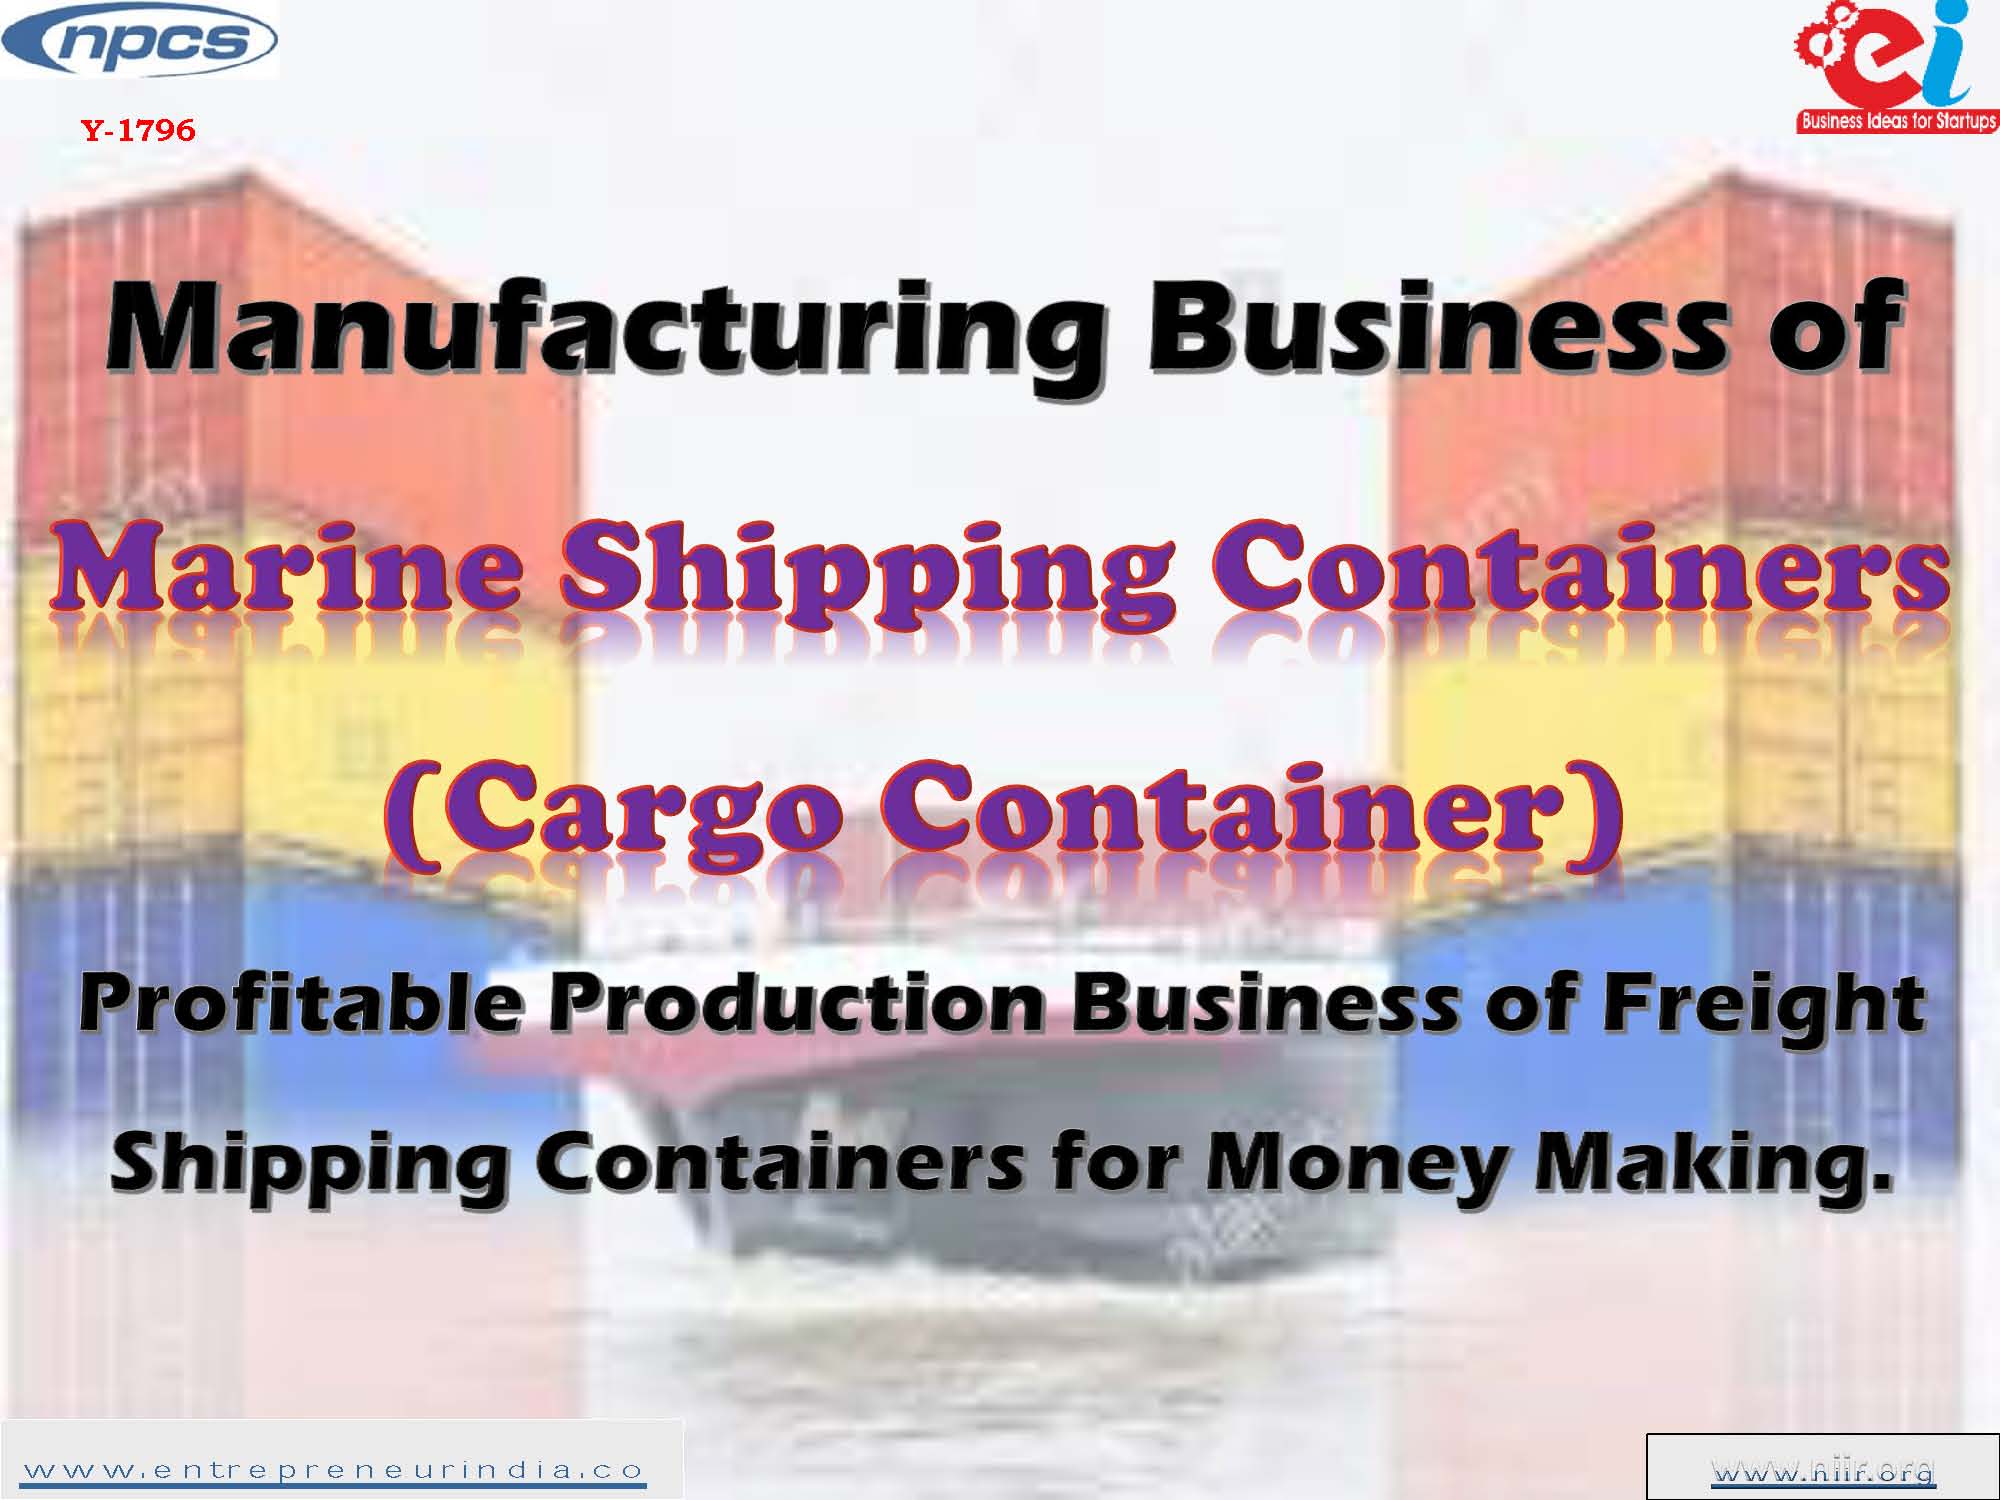 Manufacturing Business of Marine Shipping Containers Cargo Container Profitable Production Business of Freight Shipping Containers for Money Making